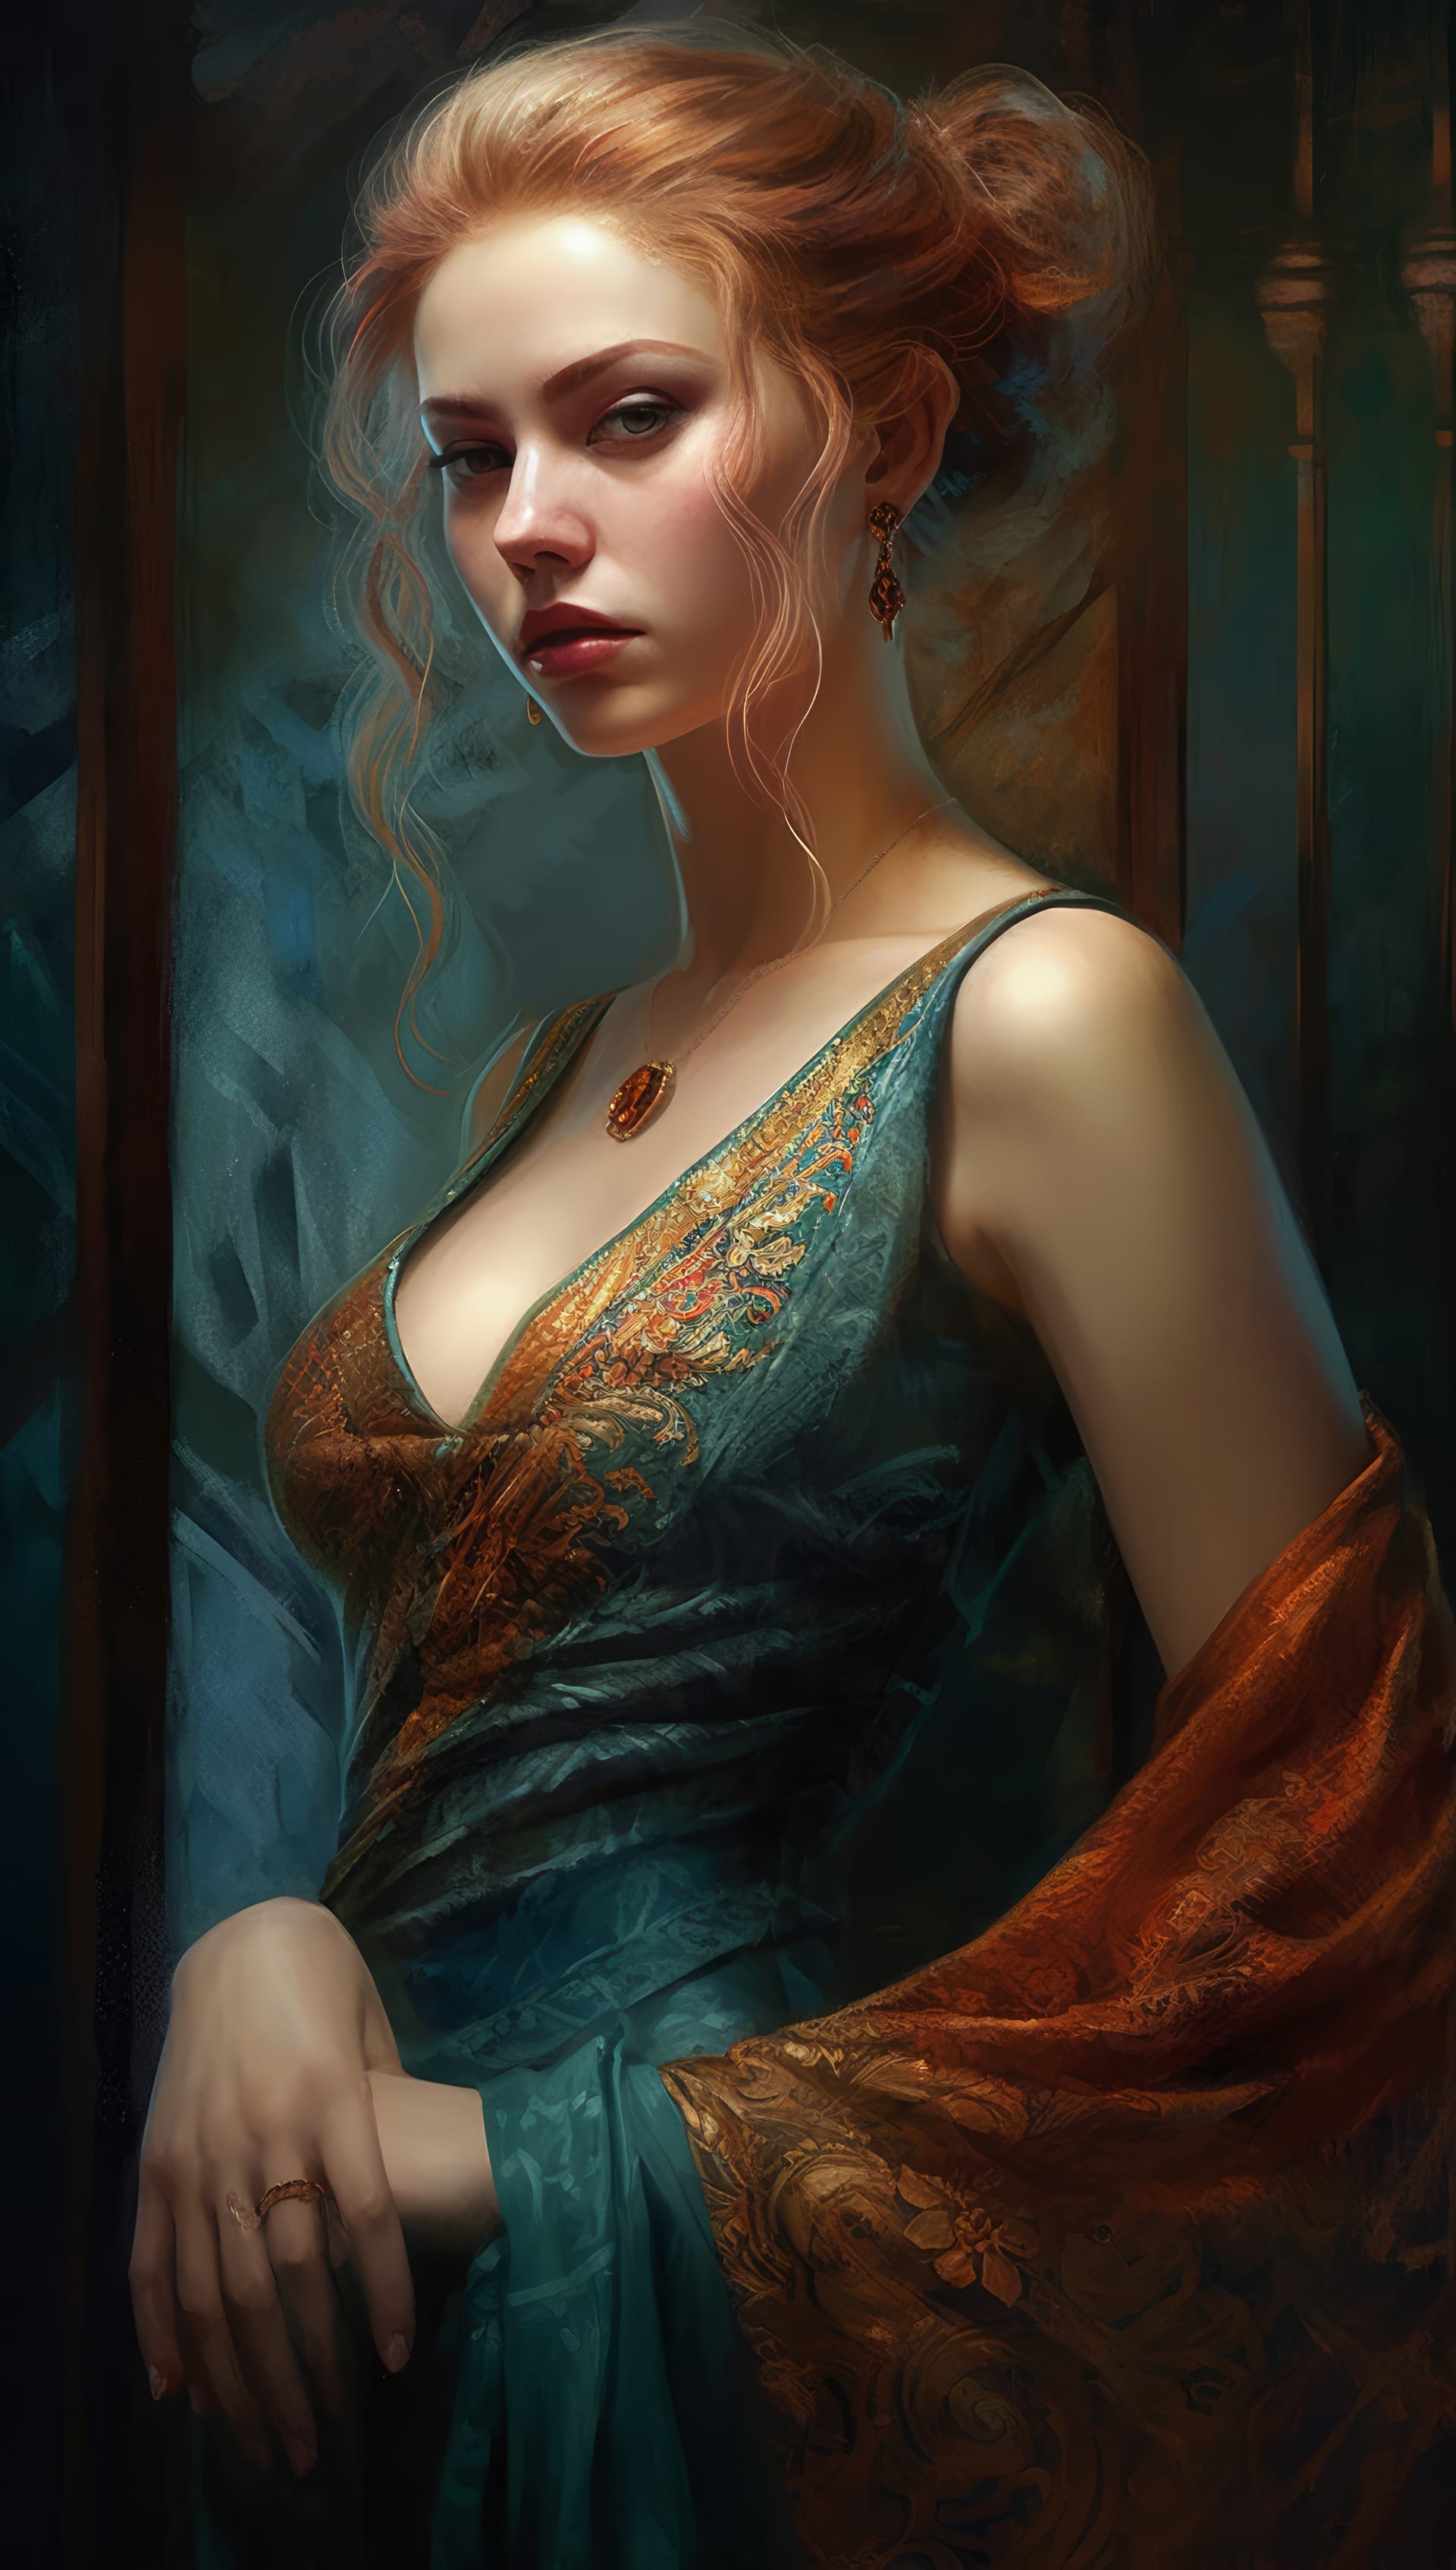 Compelling painting woman with blue dress